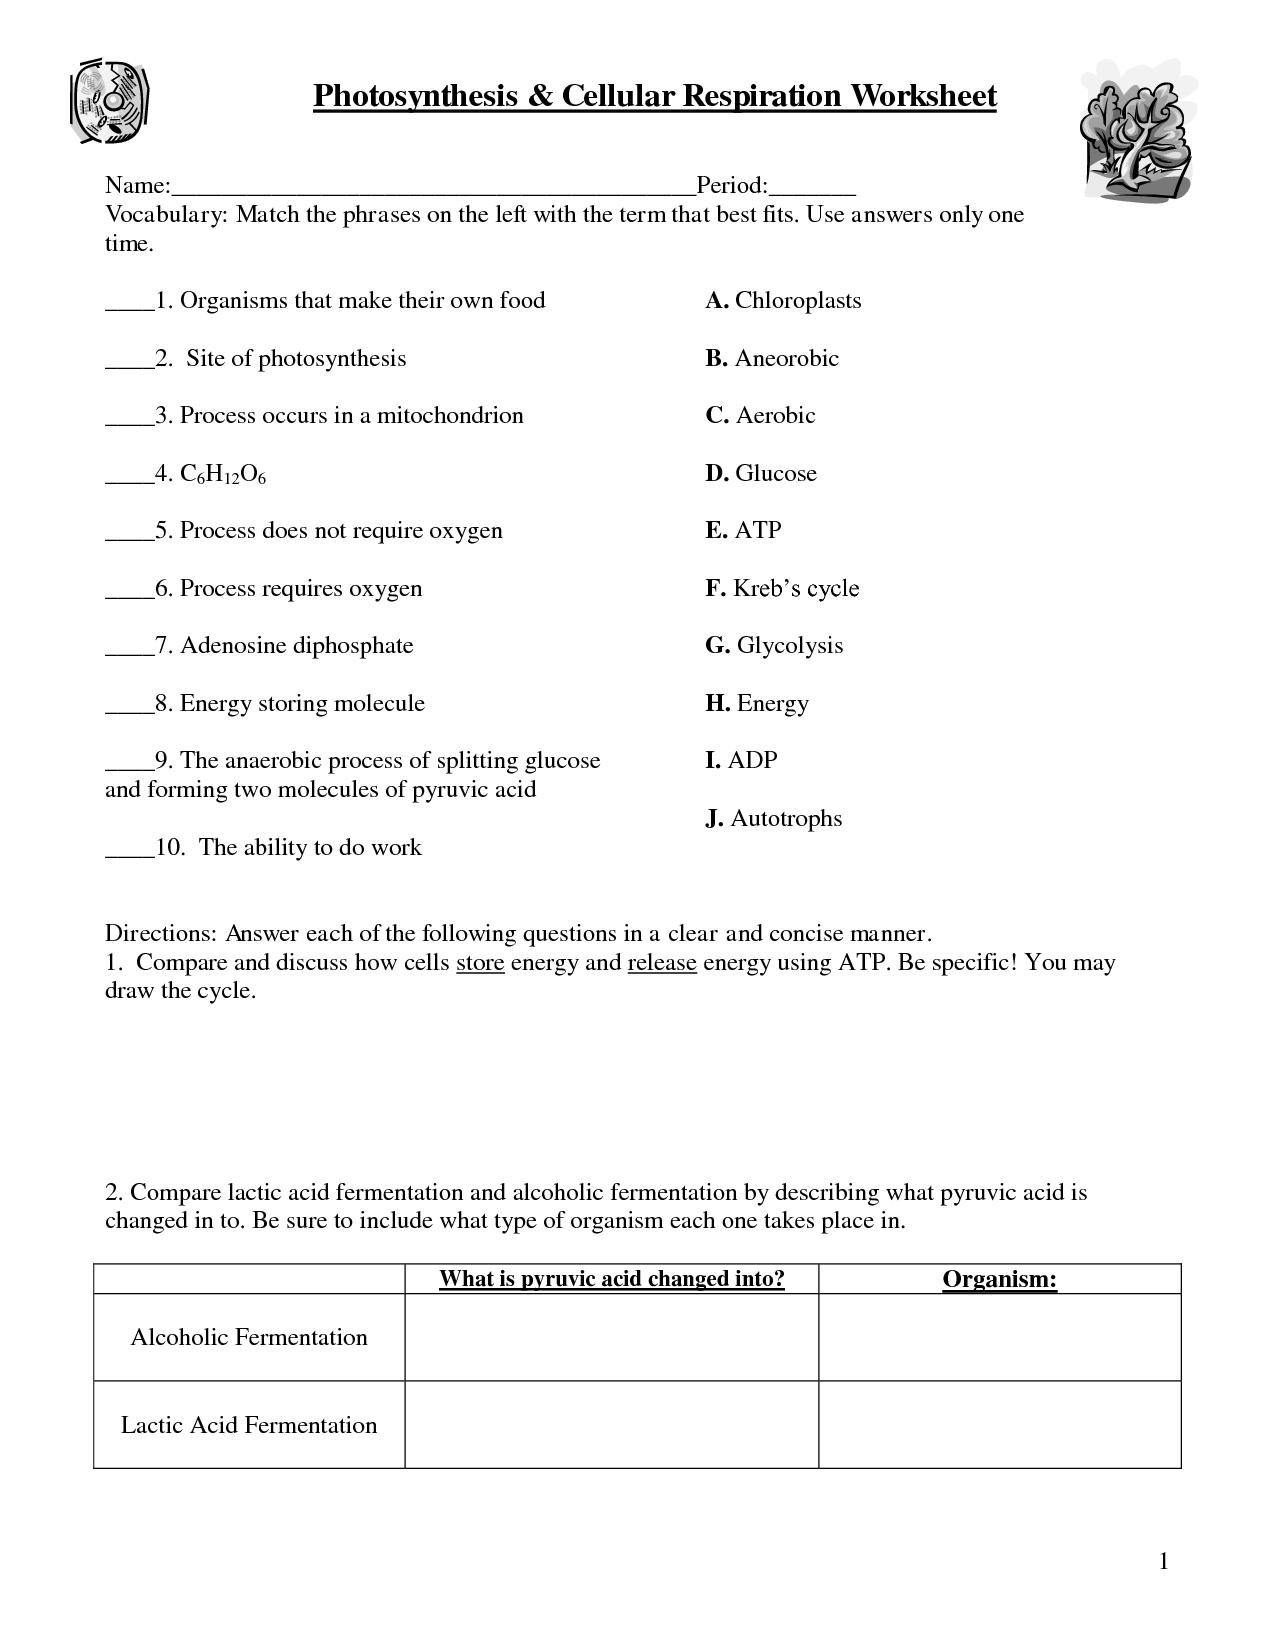 14-best-images-of-photosynthesis-worksheets-with-answer-key